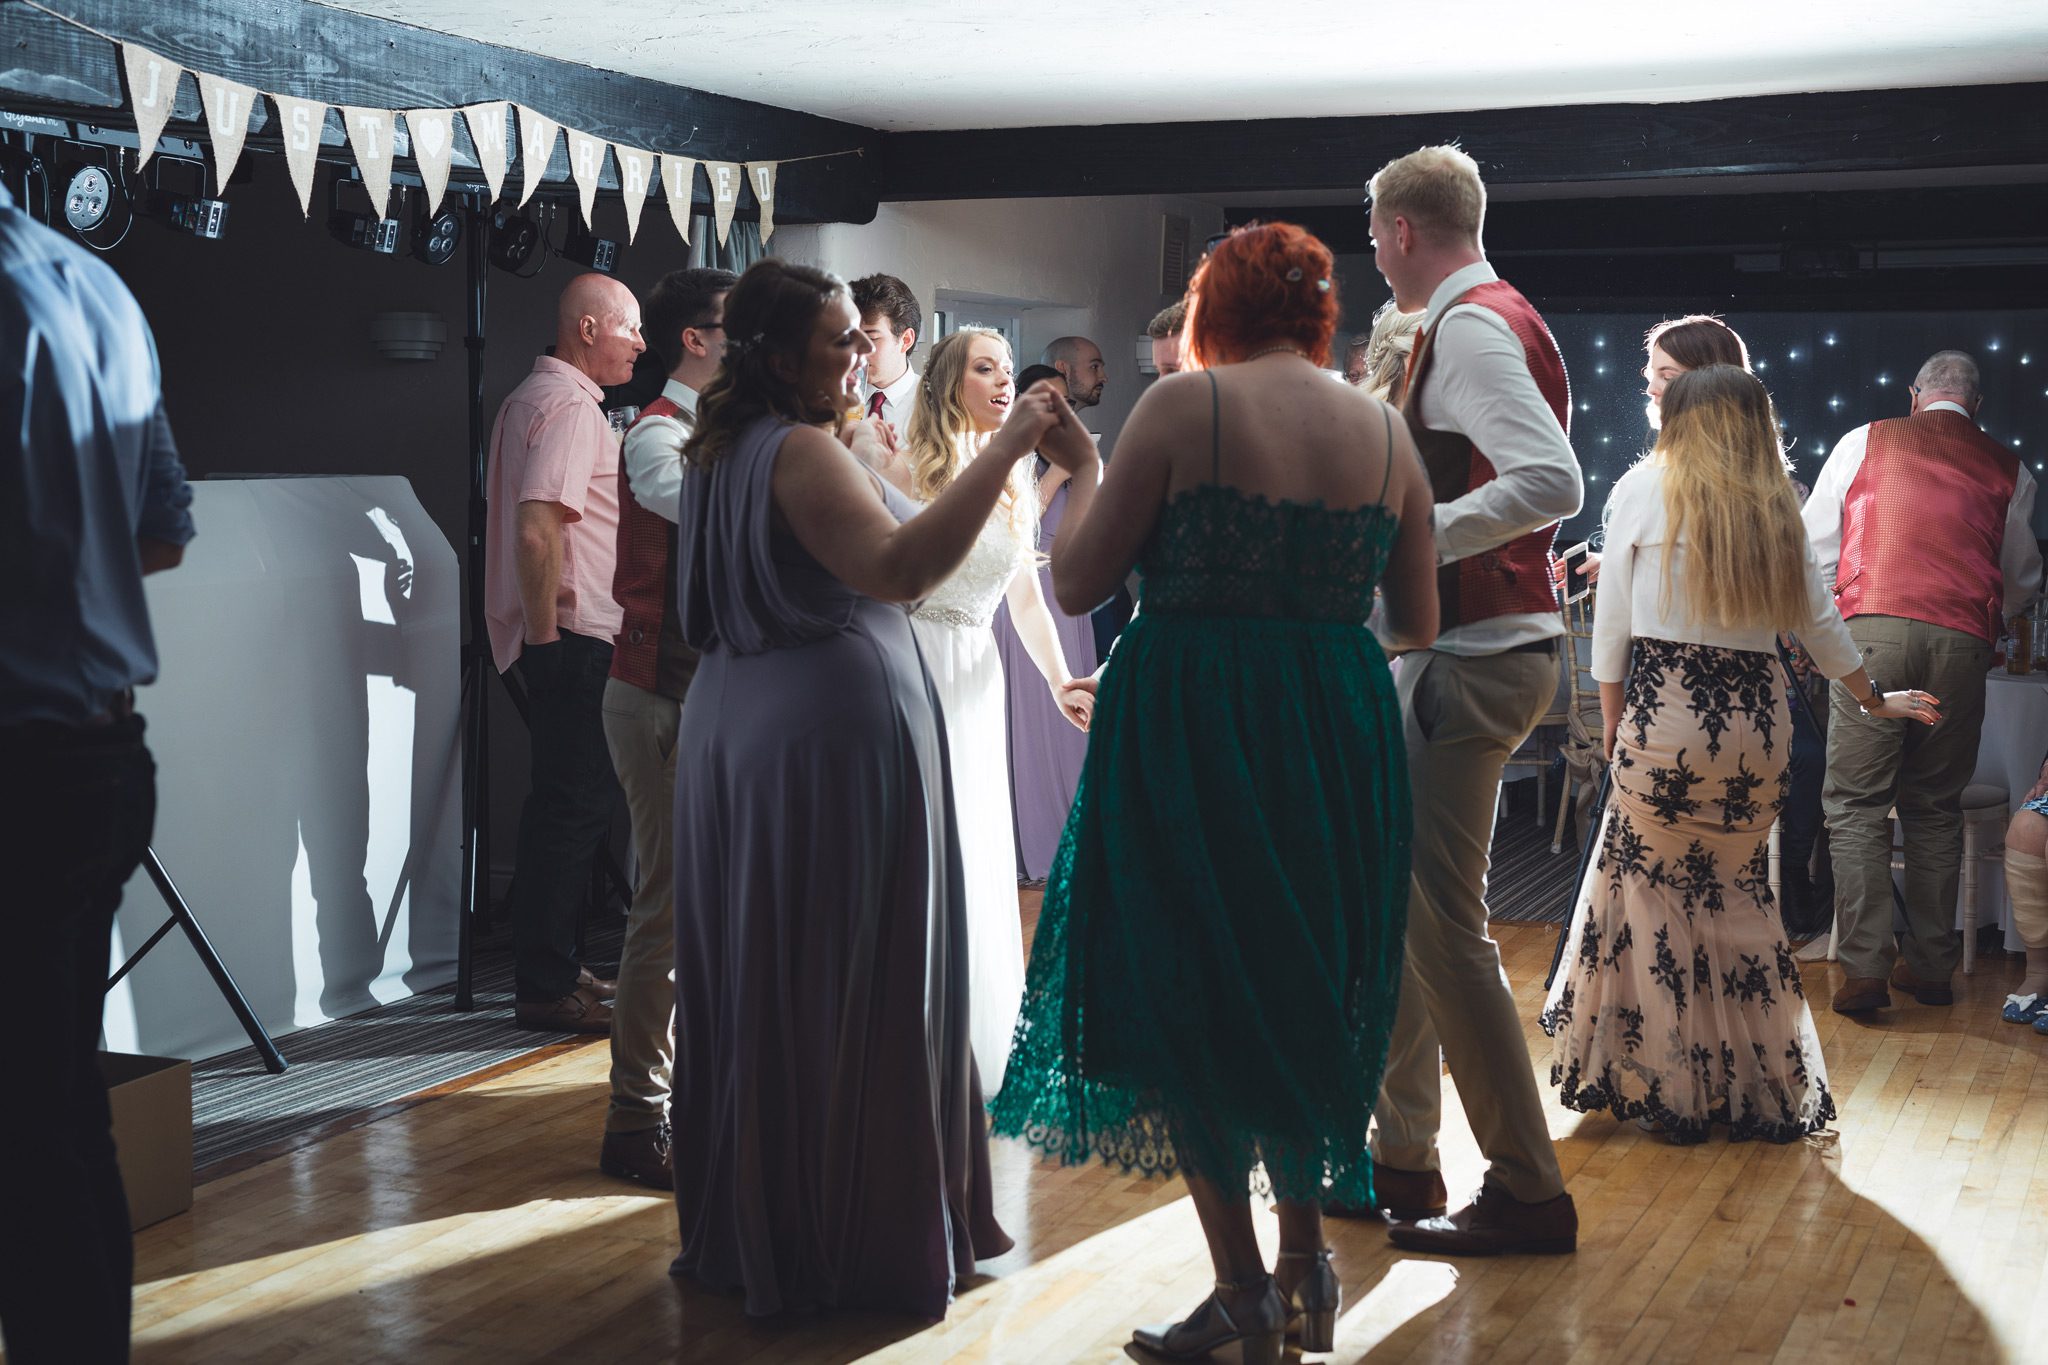 Chesterfield Wedding Party Dancing